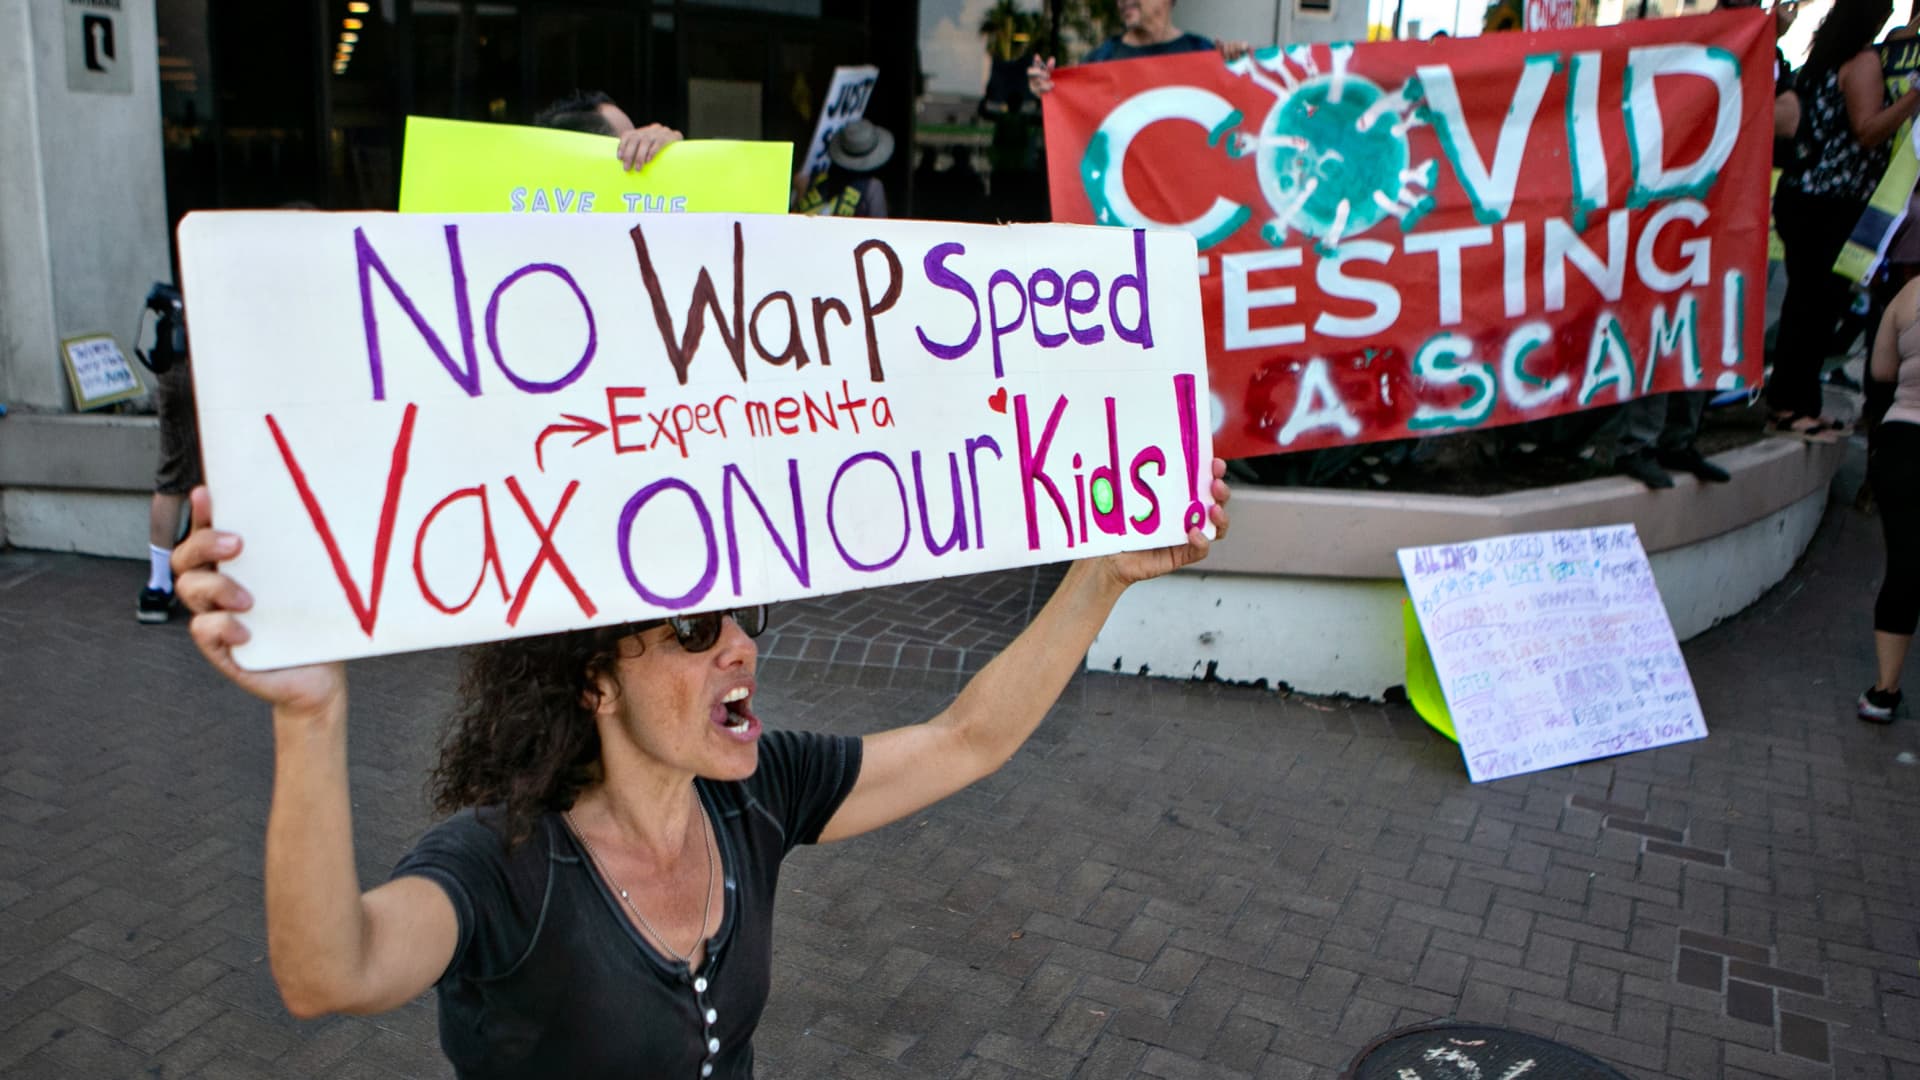 Demonstrators opposed to masking and mandatory vaccination for students gather outside the Los Angeles Unified School District headquarters as board members voted that all children 12 and older in Los Angeles public schools must be fully vaccinated against COVID-19 by January to enter campus on Thursday, Sept. 9, 2021 in Los Angeles, CA.